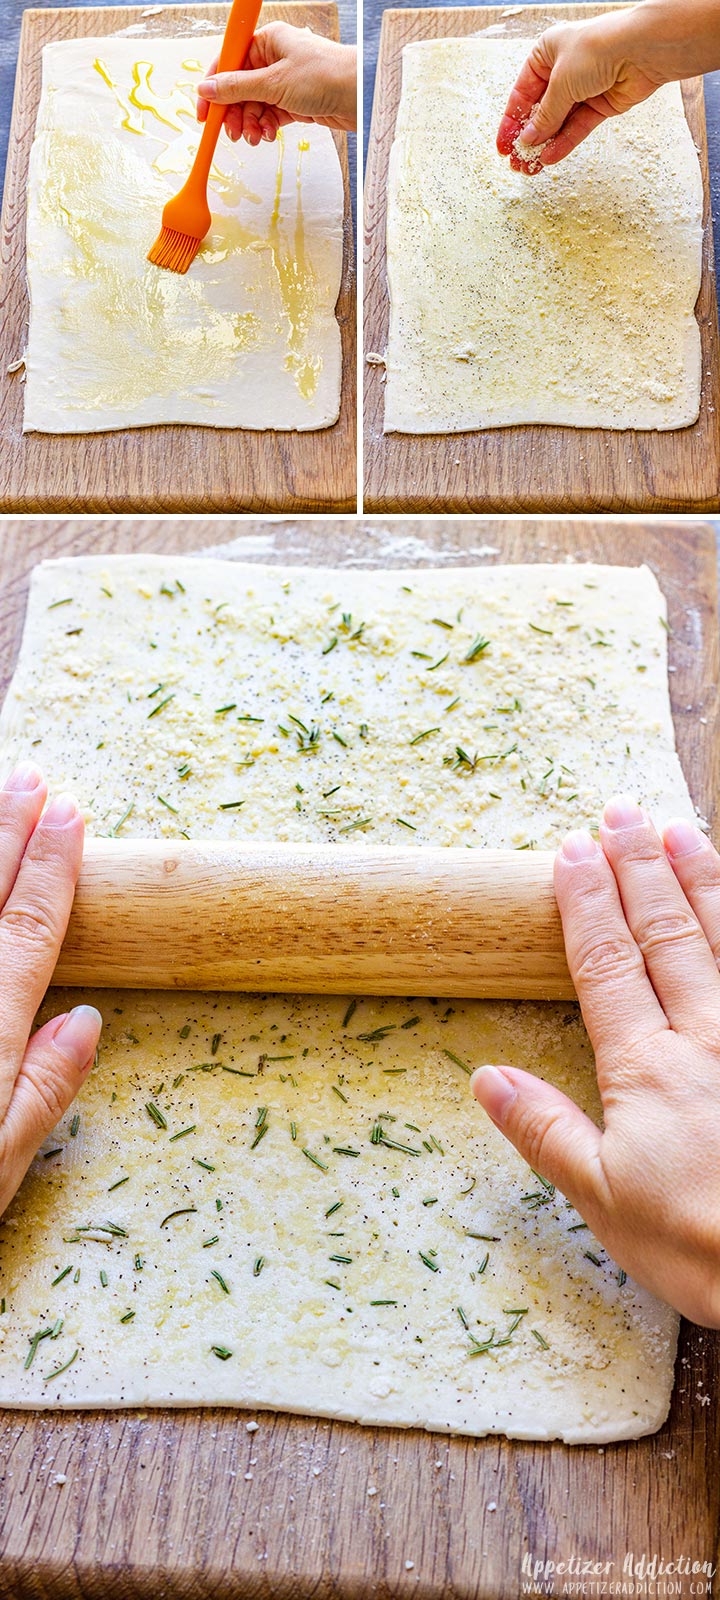 How to make Puff Pastry Breadsticks Step 1